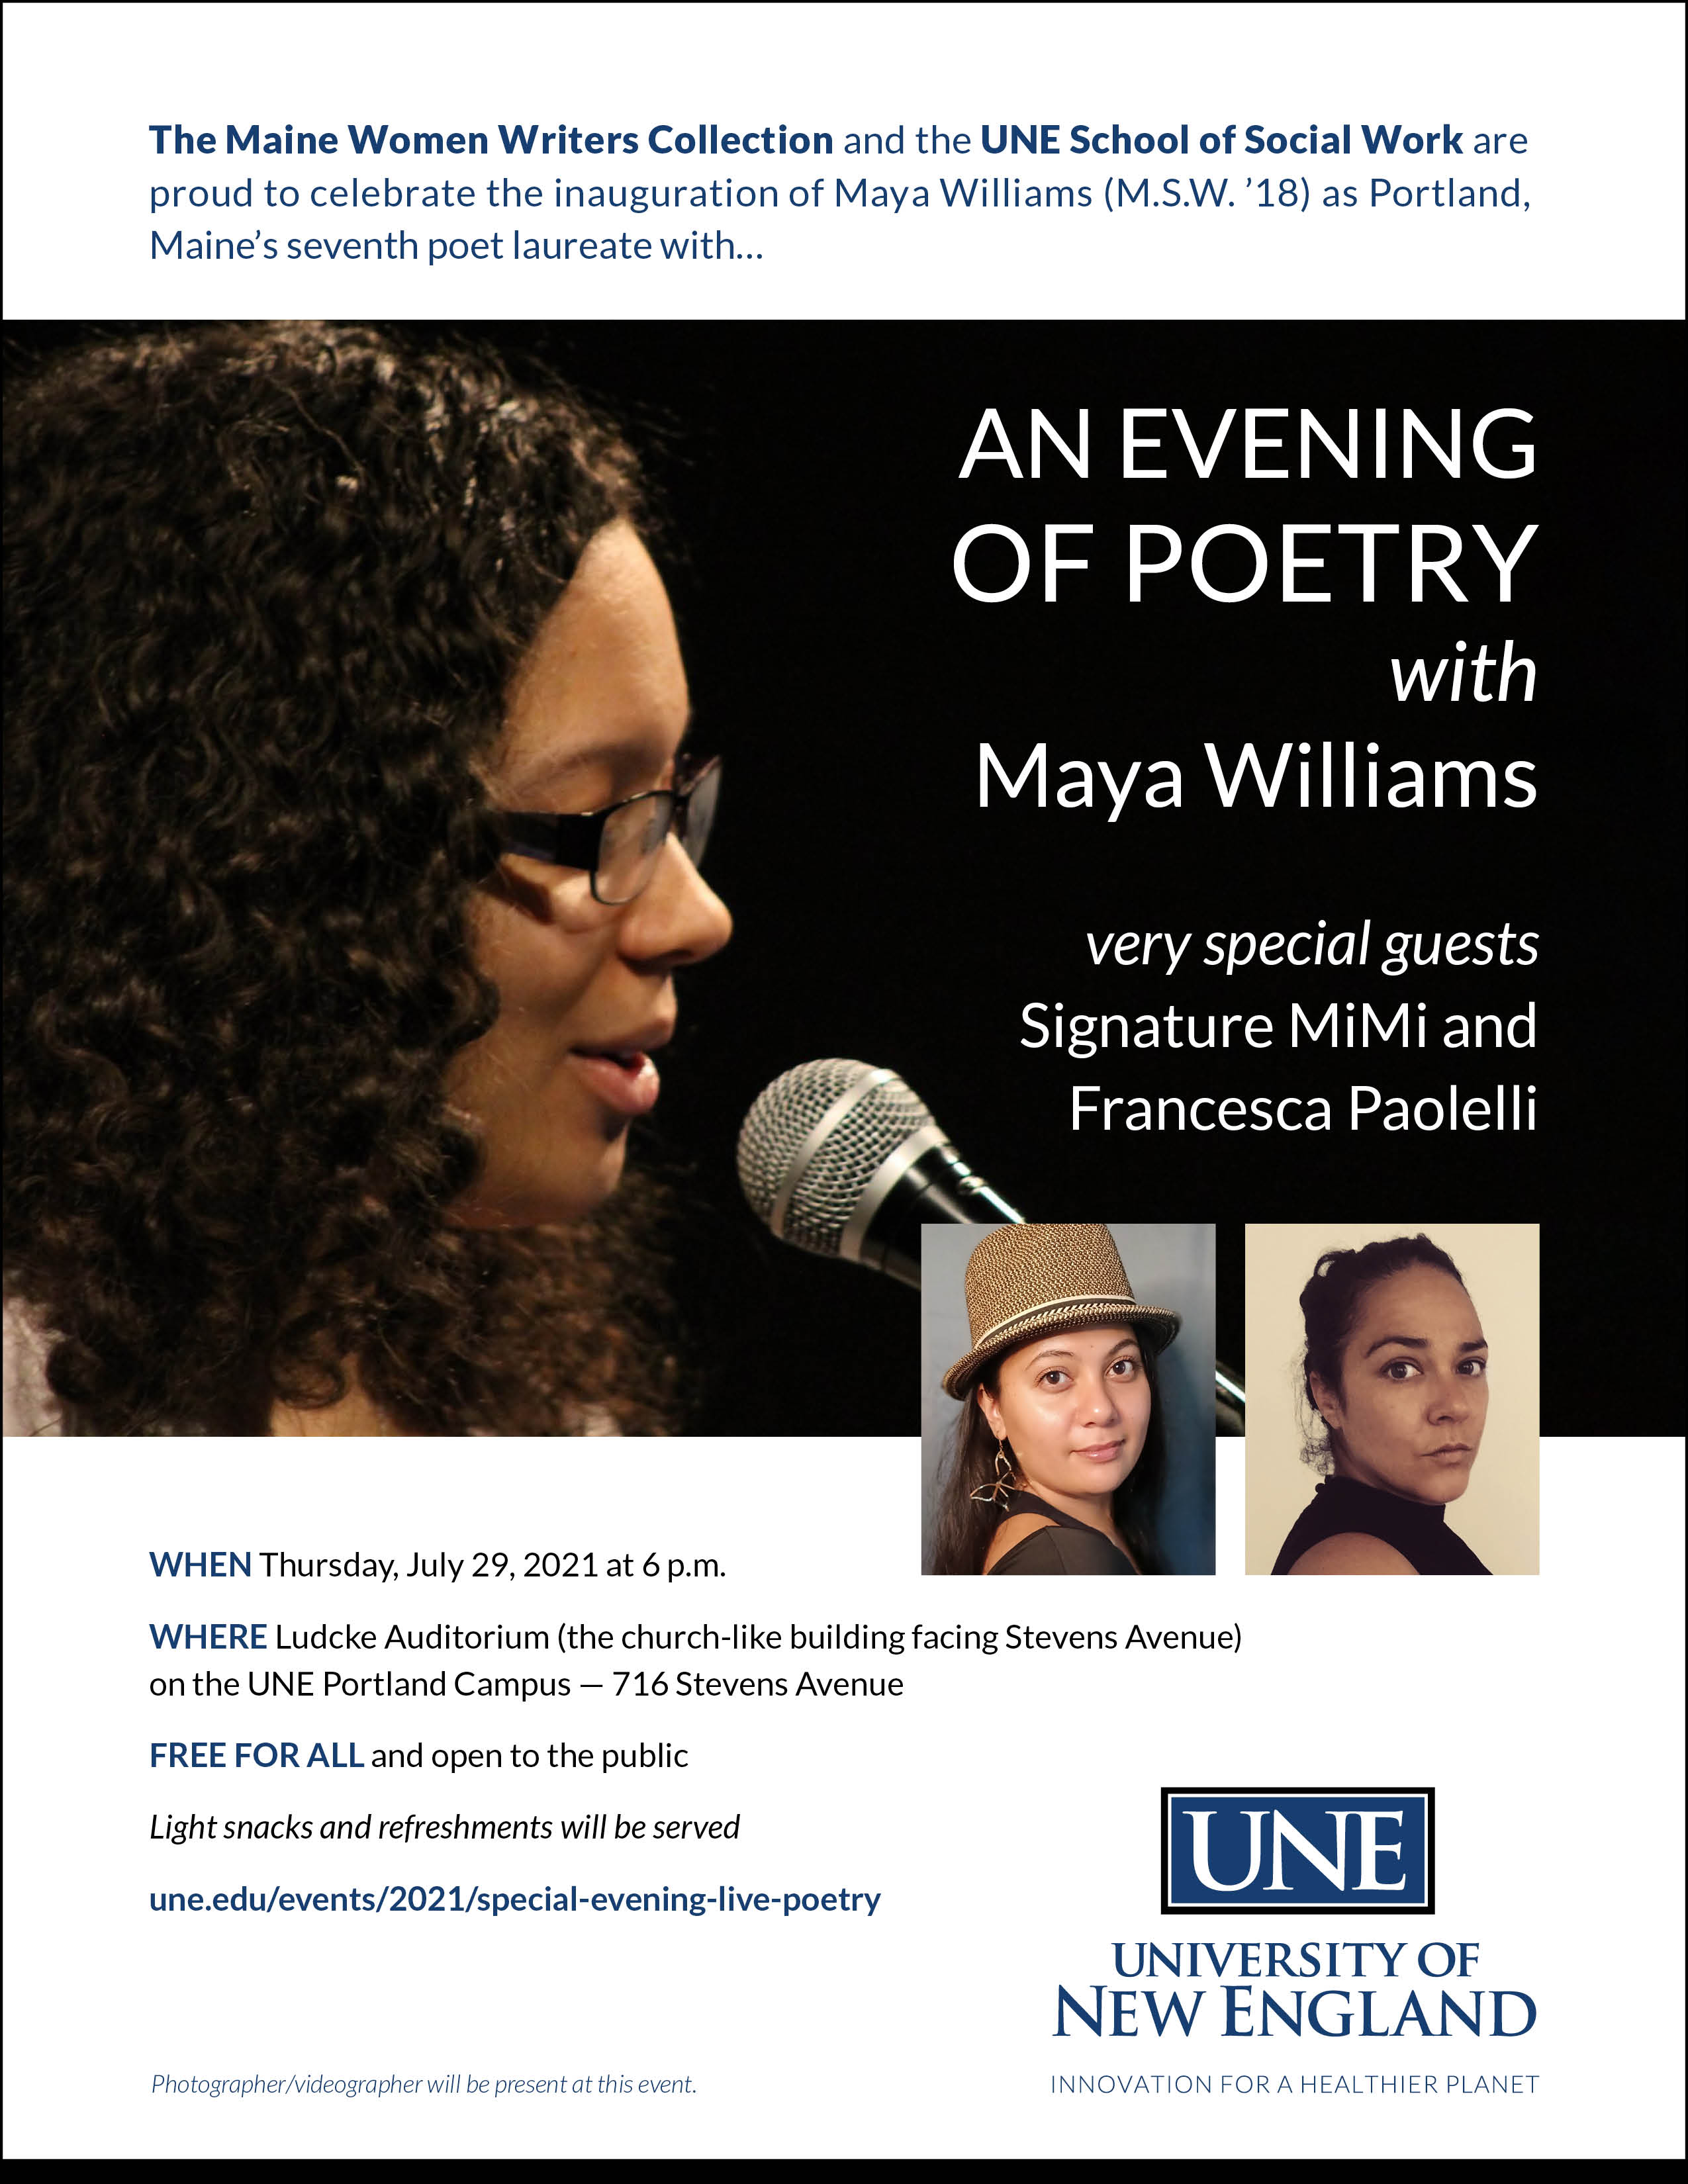 An Evening of Poetry with Maya Williams